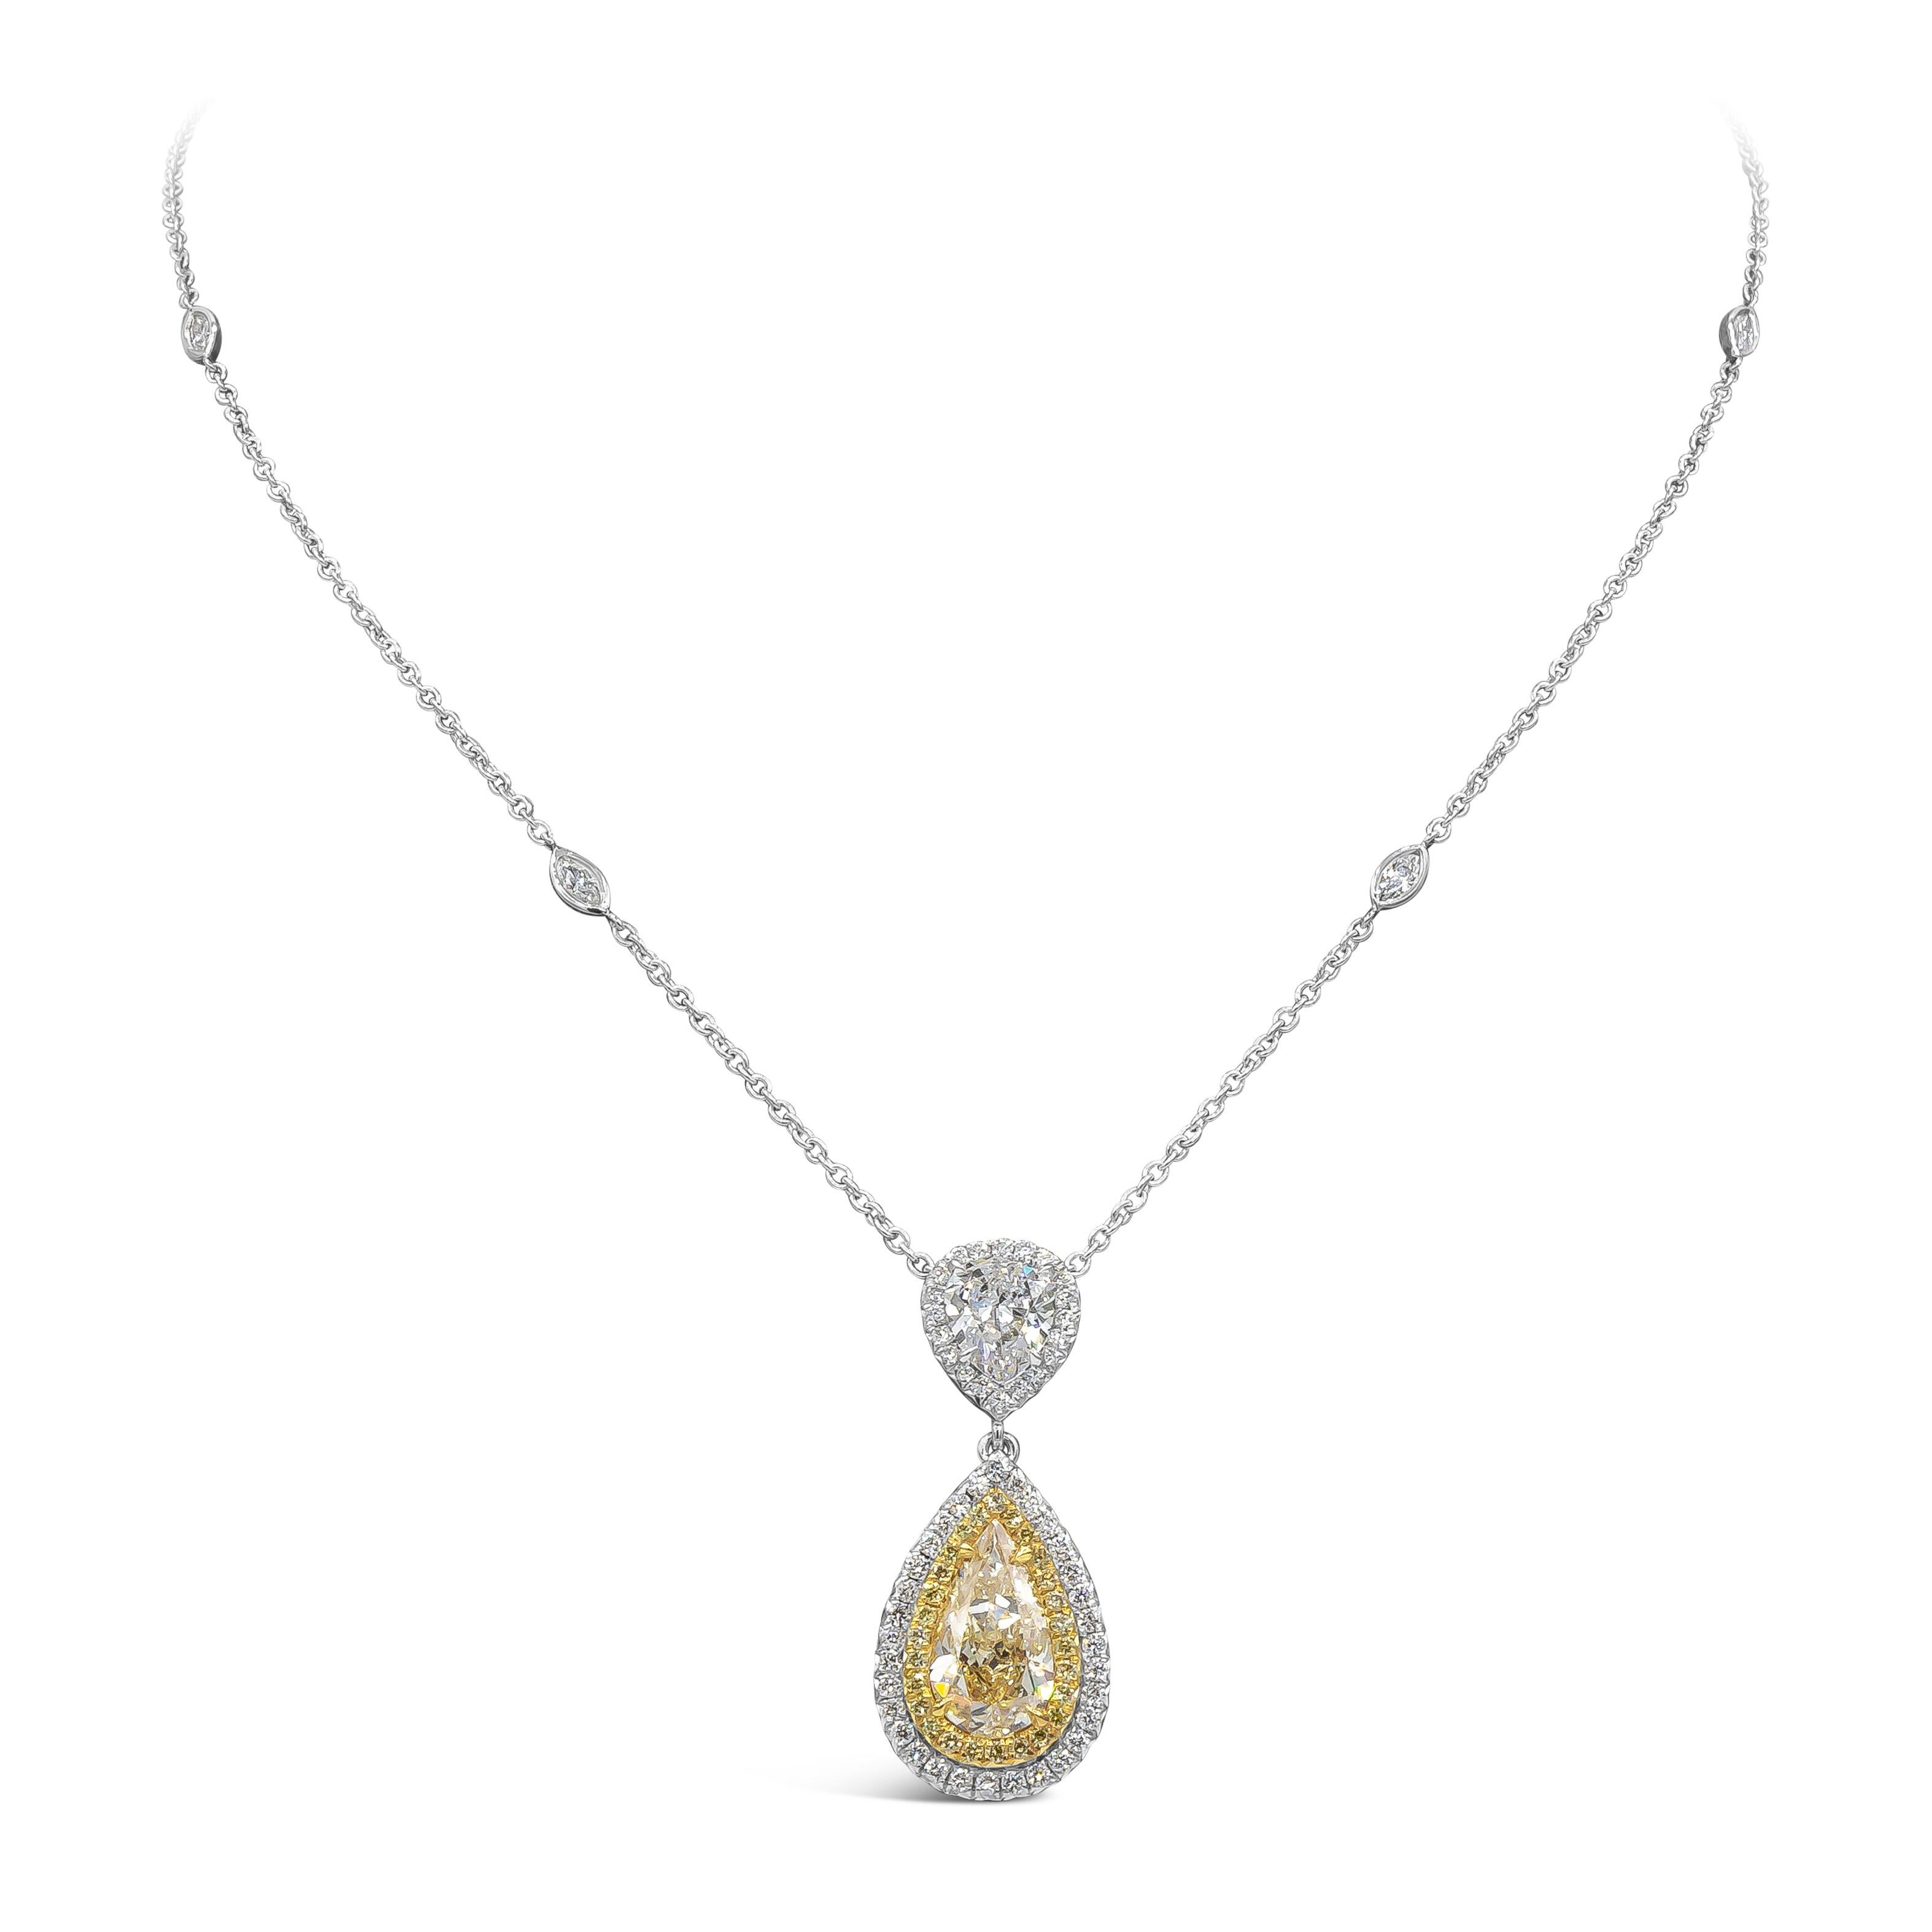 Showcasing a 2.07 carat pear shape yellow diamond certified by GIA as U-V color. Surrounding the center diamond are two rows of round brilliant yellow and white diamonds. Suspended on another 1.02 carat GIA certified (F-SI2) diamond halo. Attached